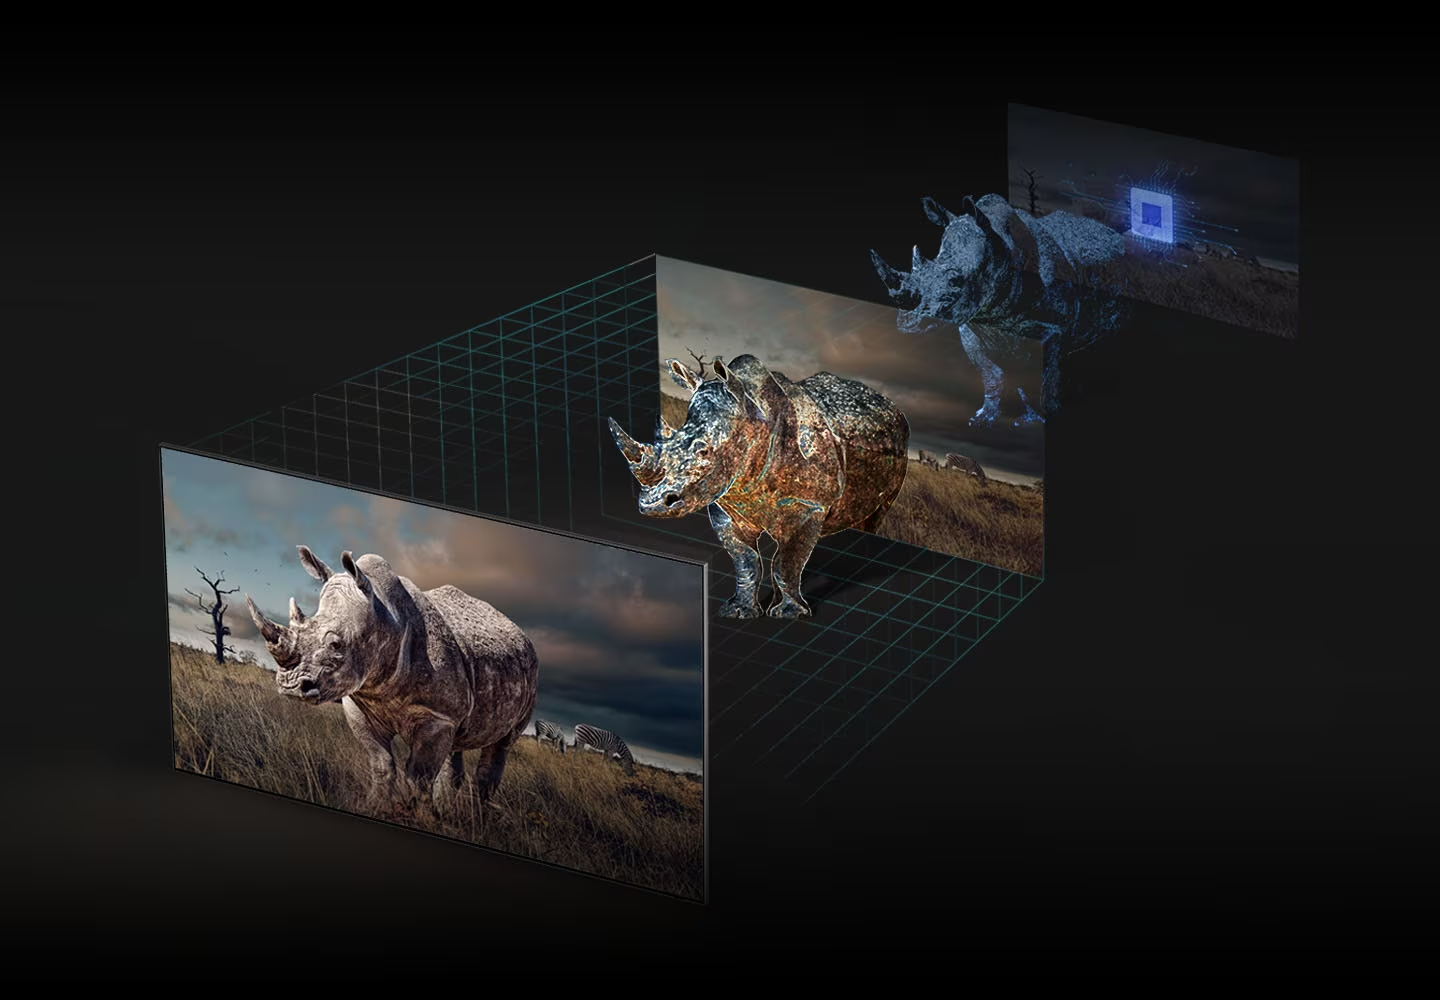 Description: The 3 steps to projecting a life like rhinoceros is exhibited using Real Depth Enhancer technology.